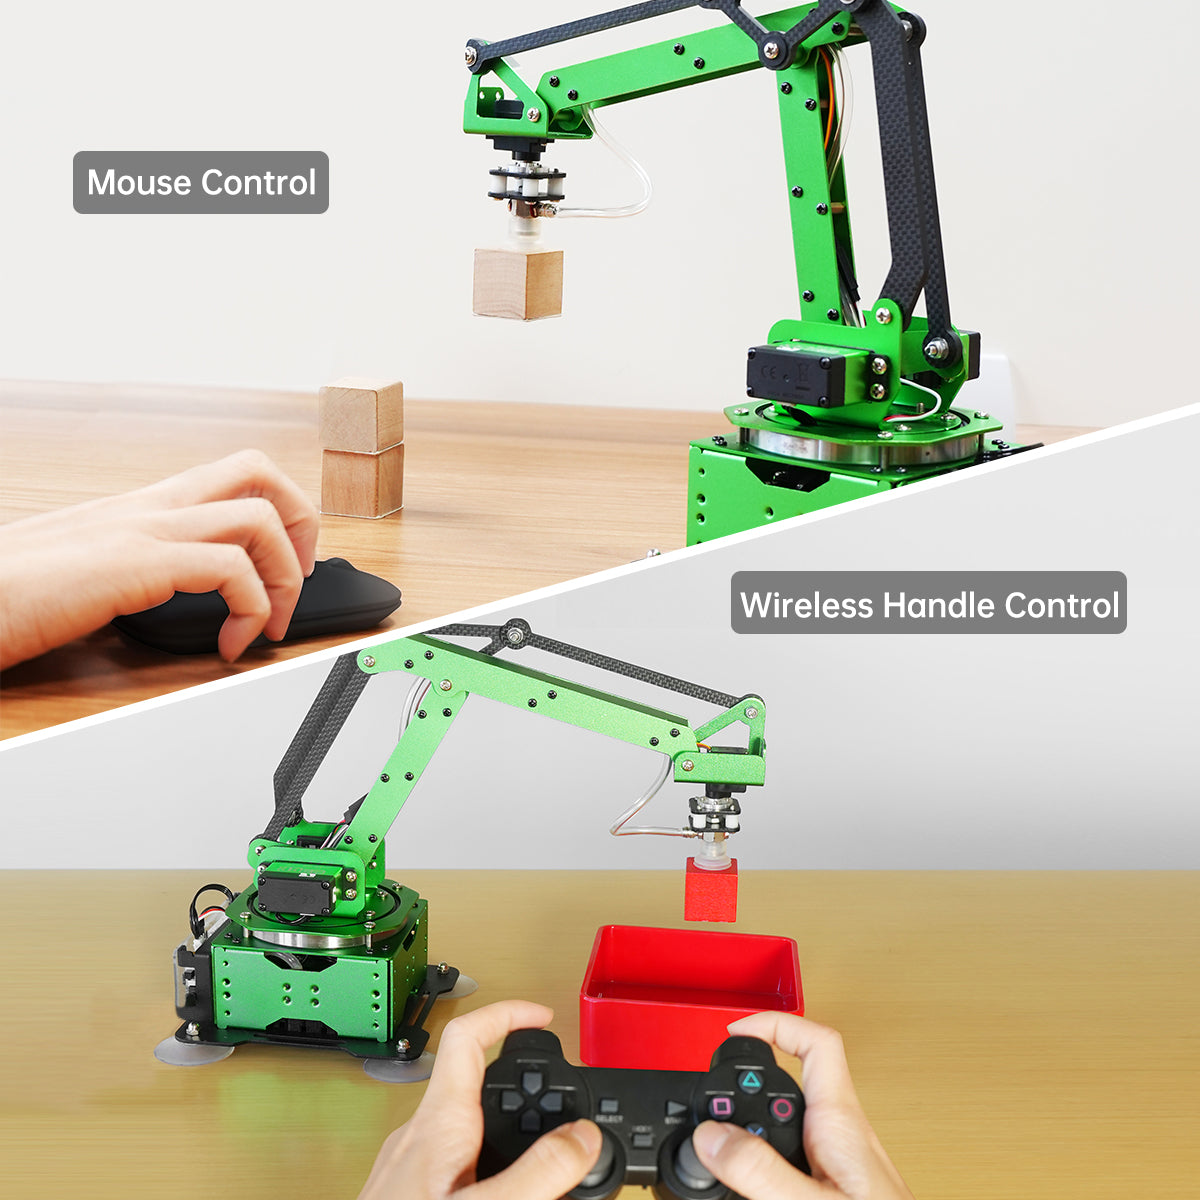 Hiwonder MaxArm Open Source Robot Arm Powered by ESP32 Support Python and Arduino Programming Inverse Kinematics Learning